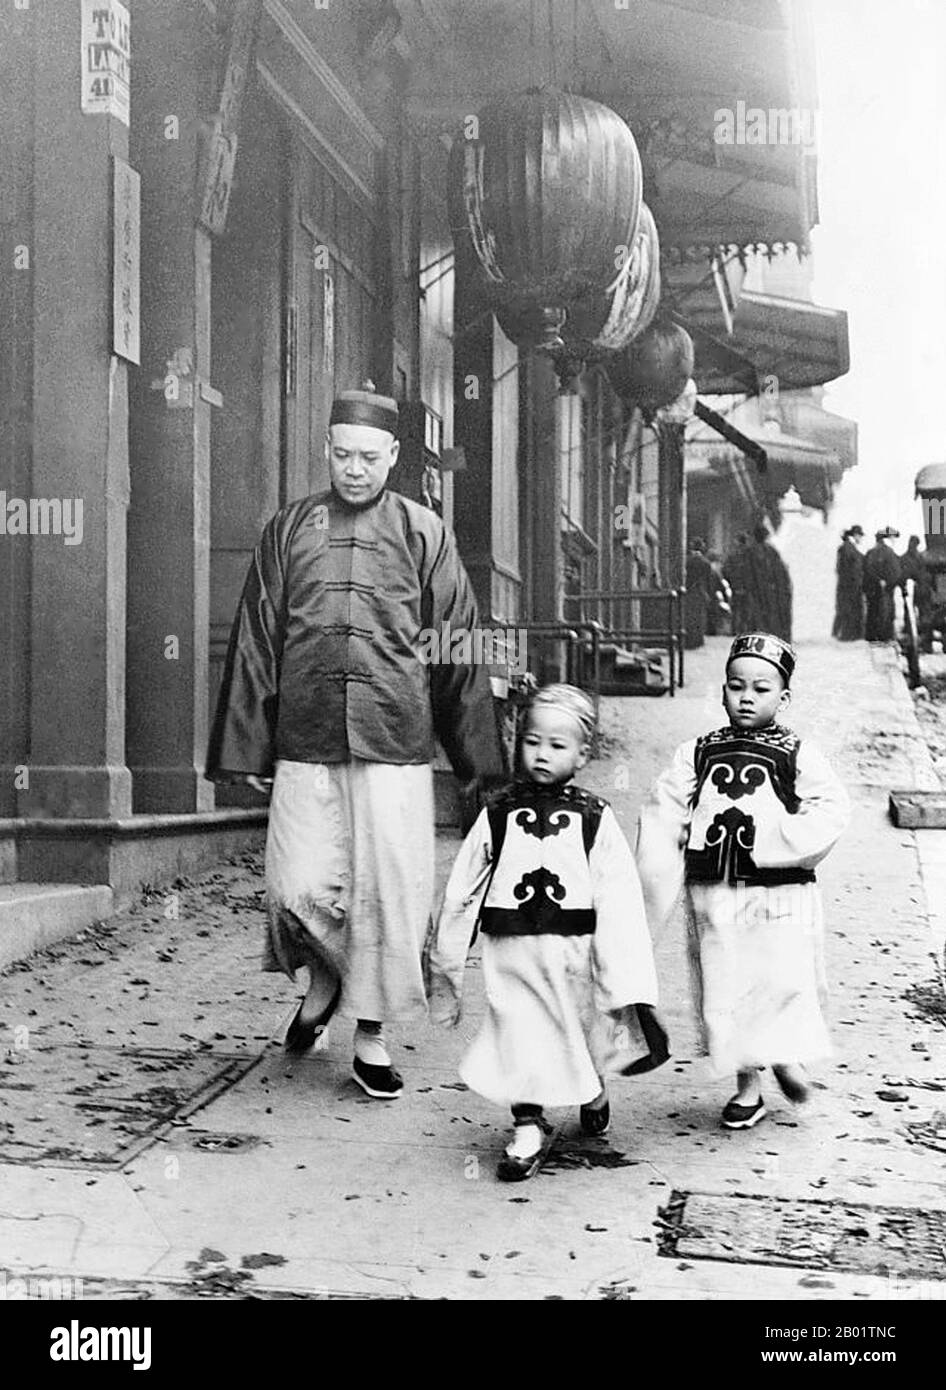 USA: Well-to-do Chinese businessman with his two sons, San Francisco Chinatown. Photo by Arnold Genthe, c. 1900.  San Francisco's Chinatown was the port of entry for early Hoisanese and Zhongshanese Chinese immigrants from the Guangdong province of southern China from the 1850s to the 1900s. The area was the one geographical region deeded by the city government and private property owners which allowed Chinese persons to inherit and inhabit dwellings within the city.  The majority of these Chinese shopkeepers, restaurant owners and hired workers in San Francisco were mainly Hoisanese and male. Stock Photo